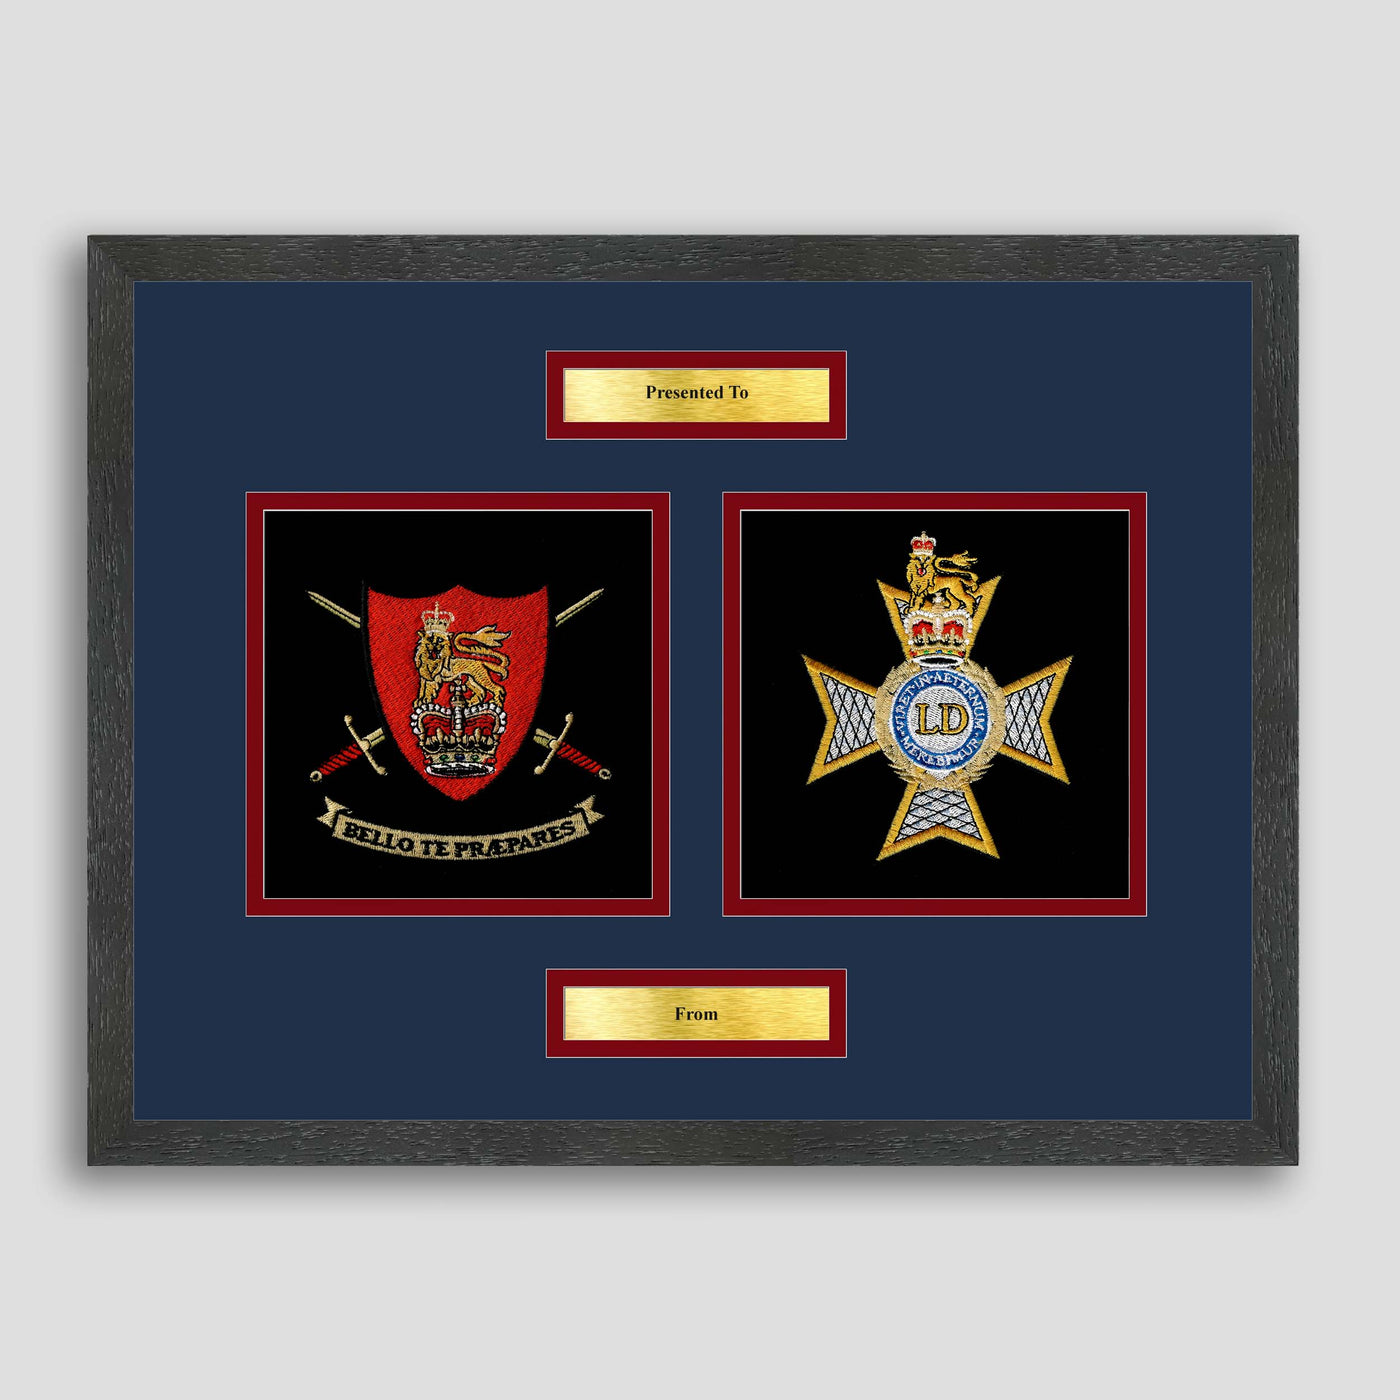 Army Training Regiment & Light Dragoons Framed Military Embroidery Presentation